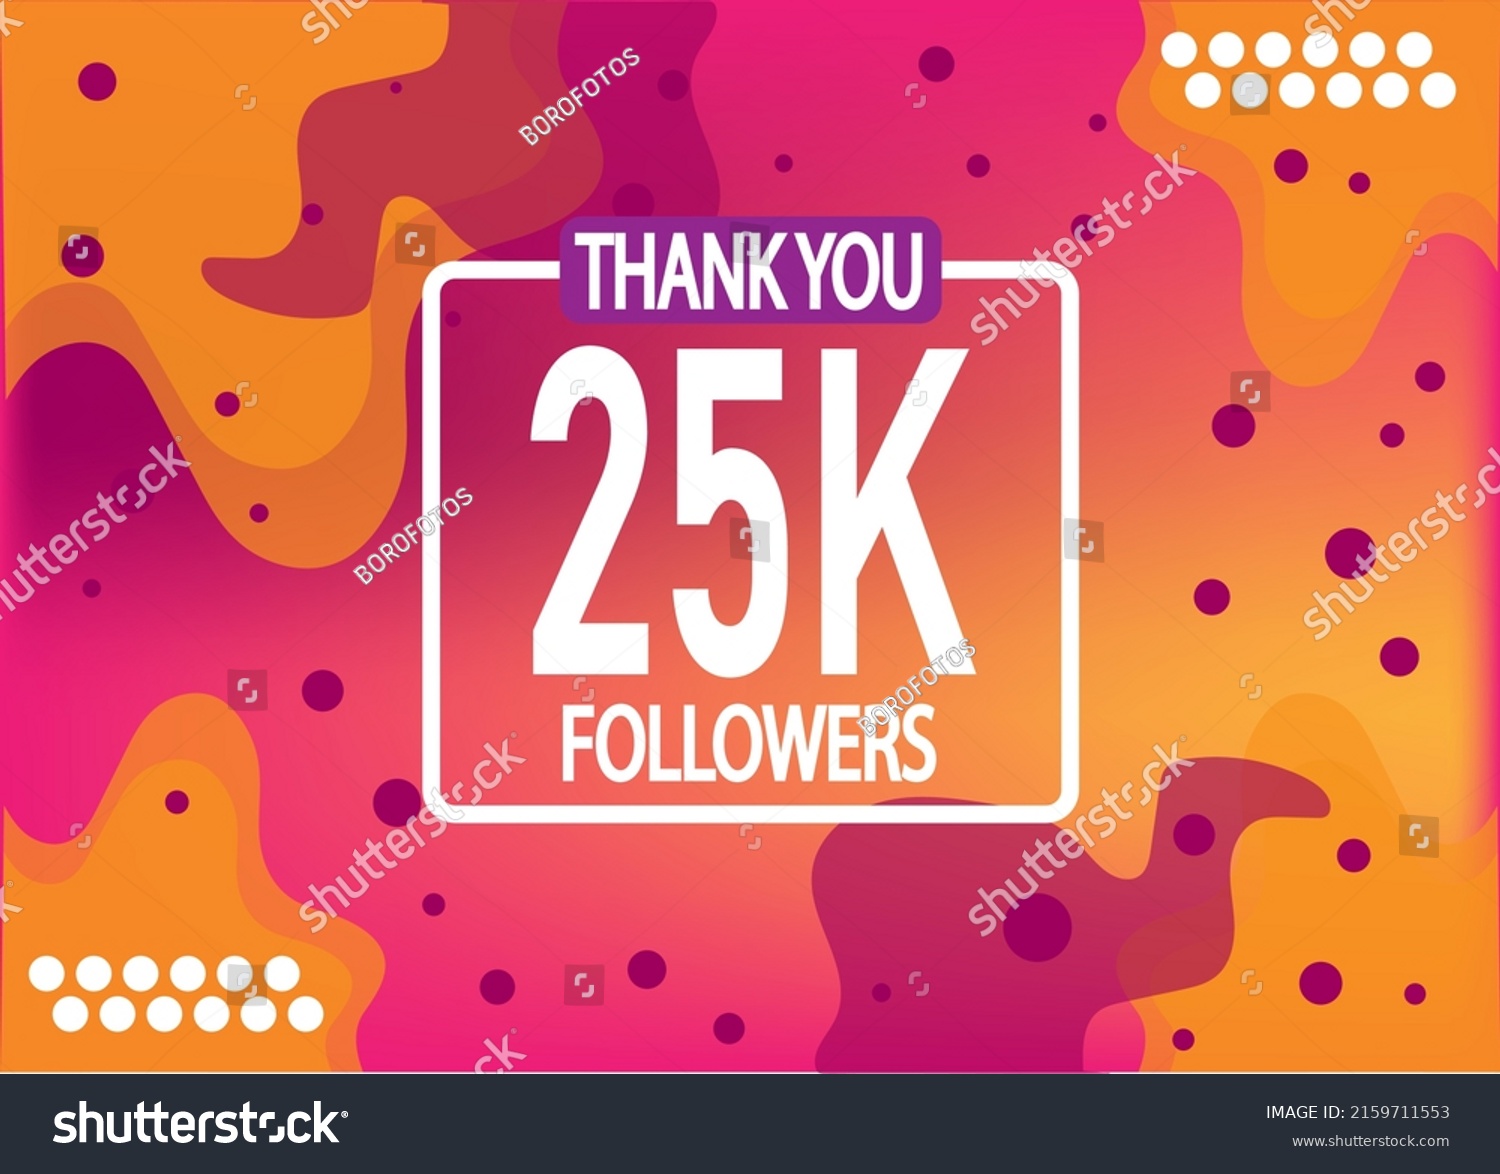 SVG of Thank you 25000 followers vector. Greeting social card thank you followers. Banner for social networks. svg